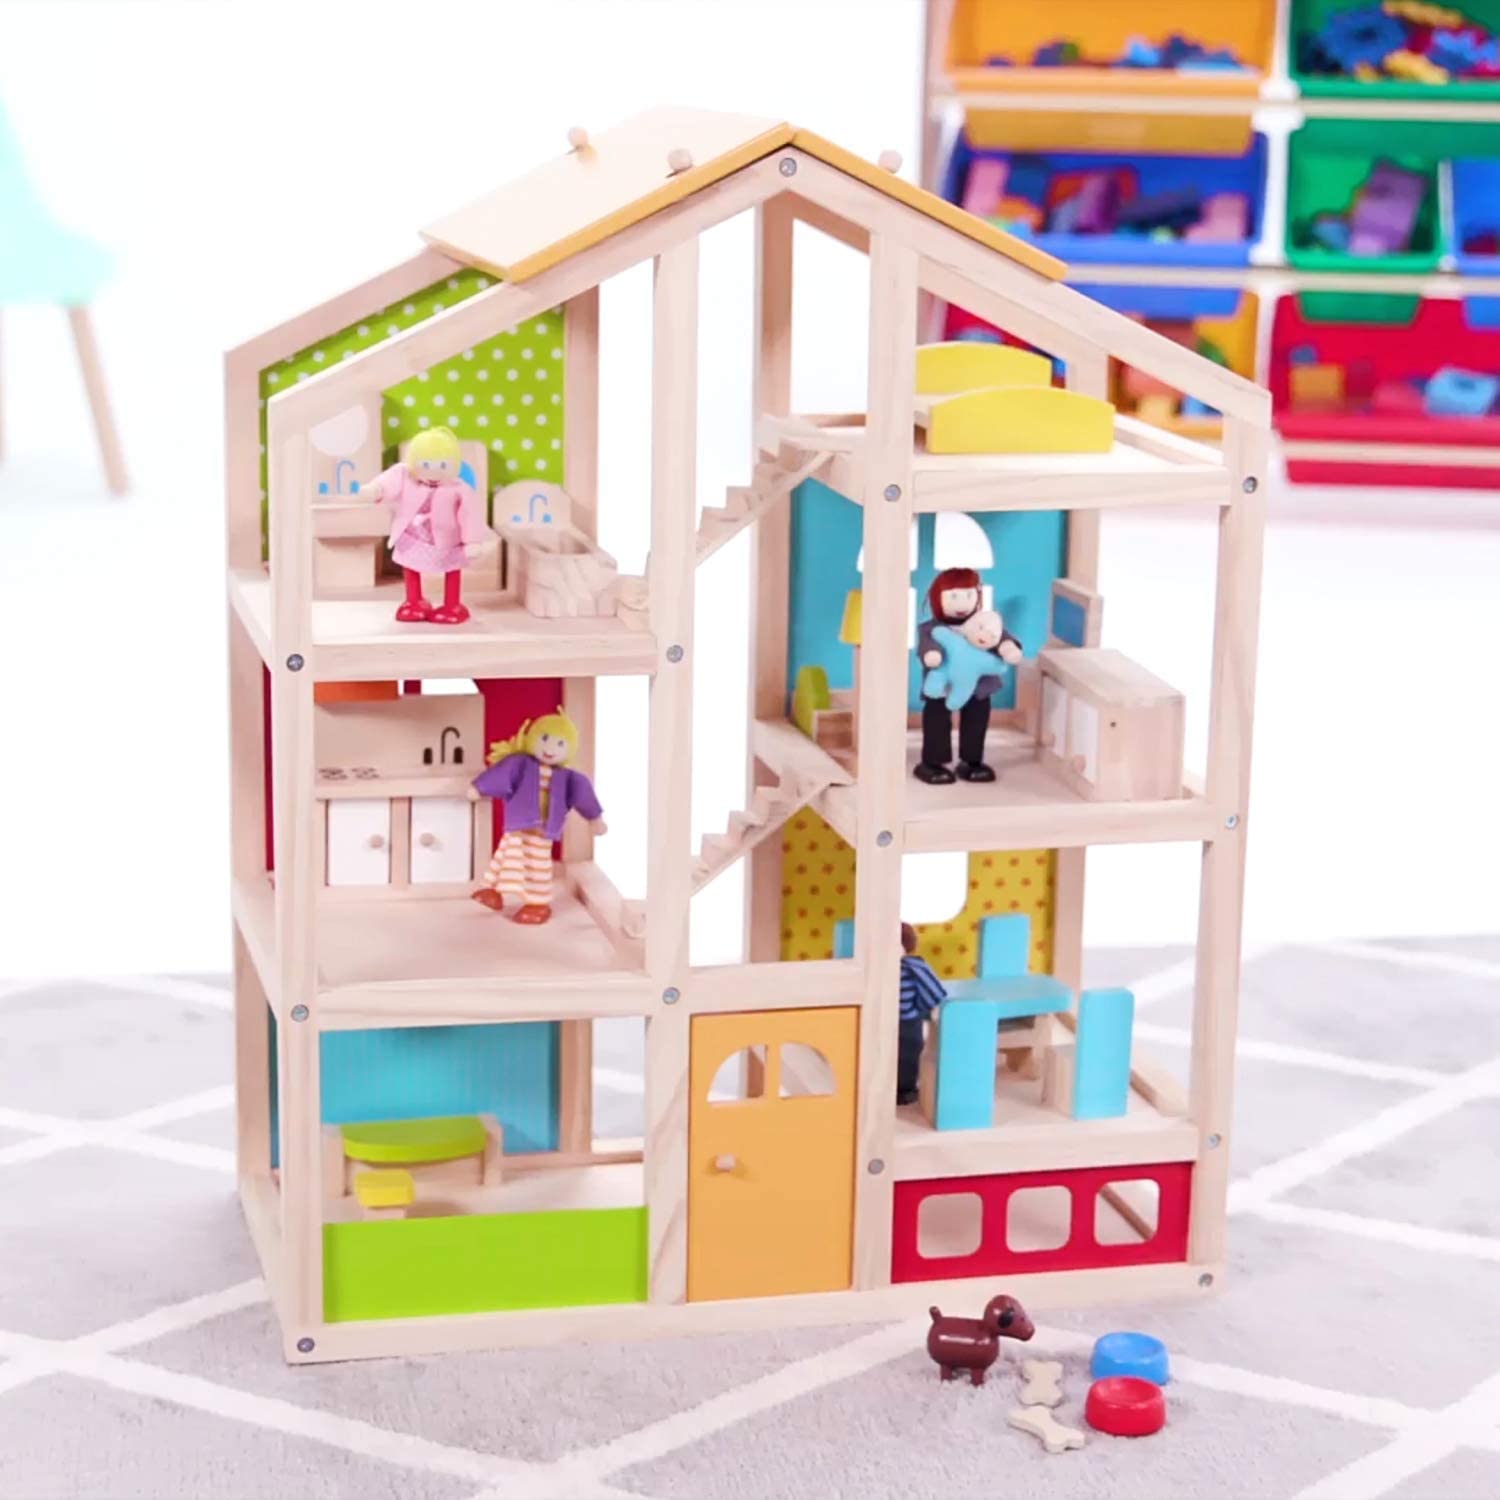 20 Pcs Wooden Dollhouse Family Set of 16 Mini People Figures and 4